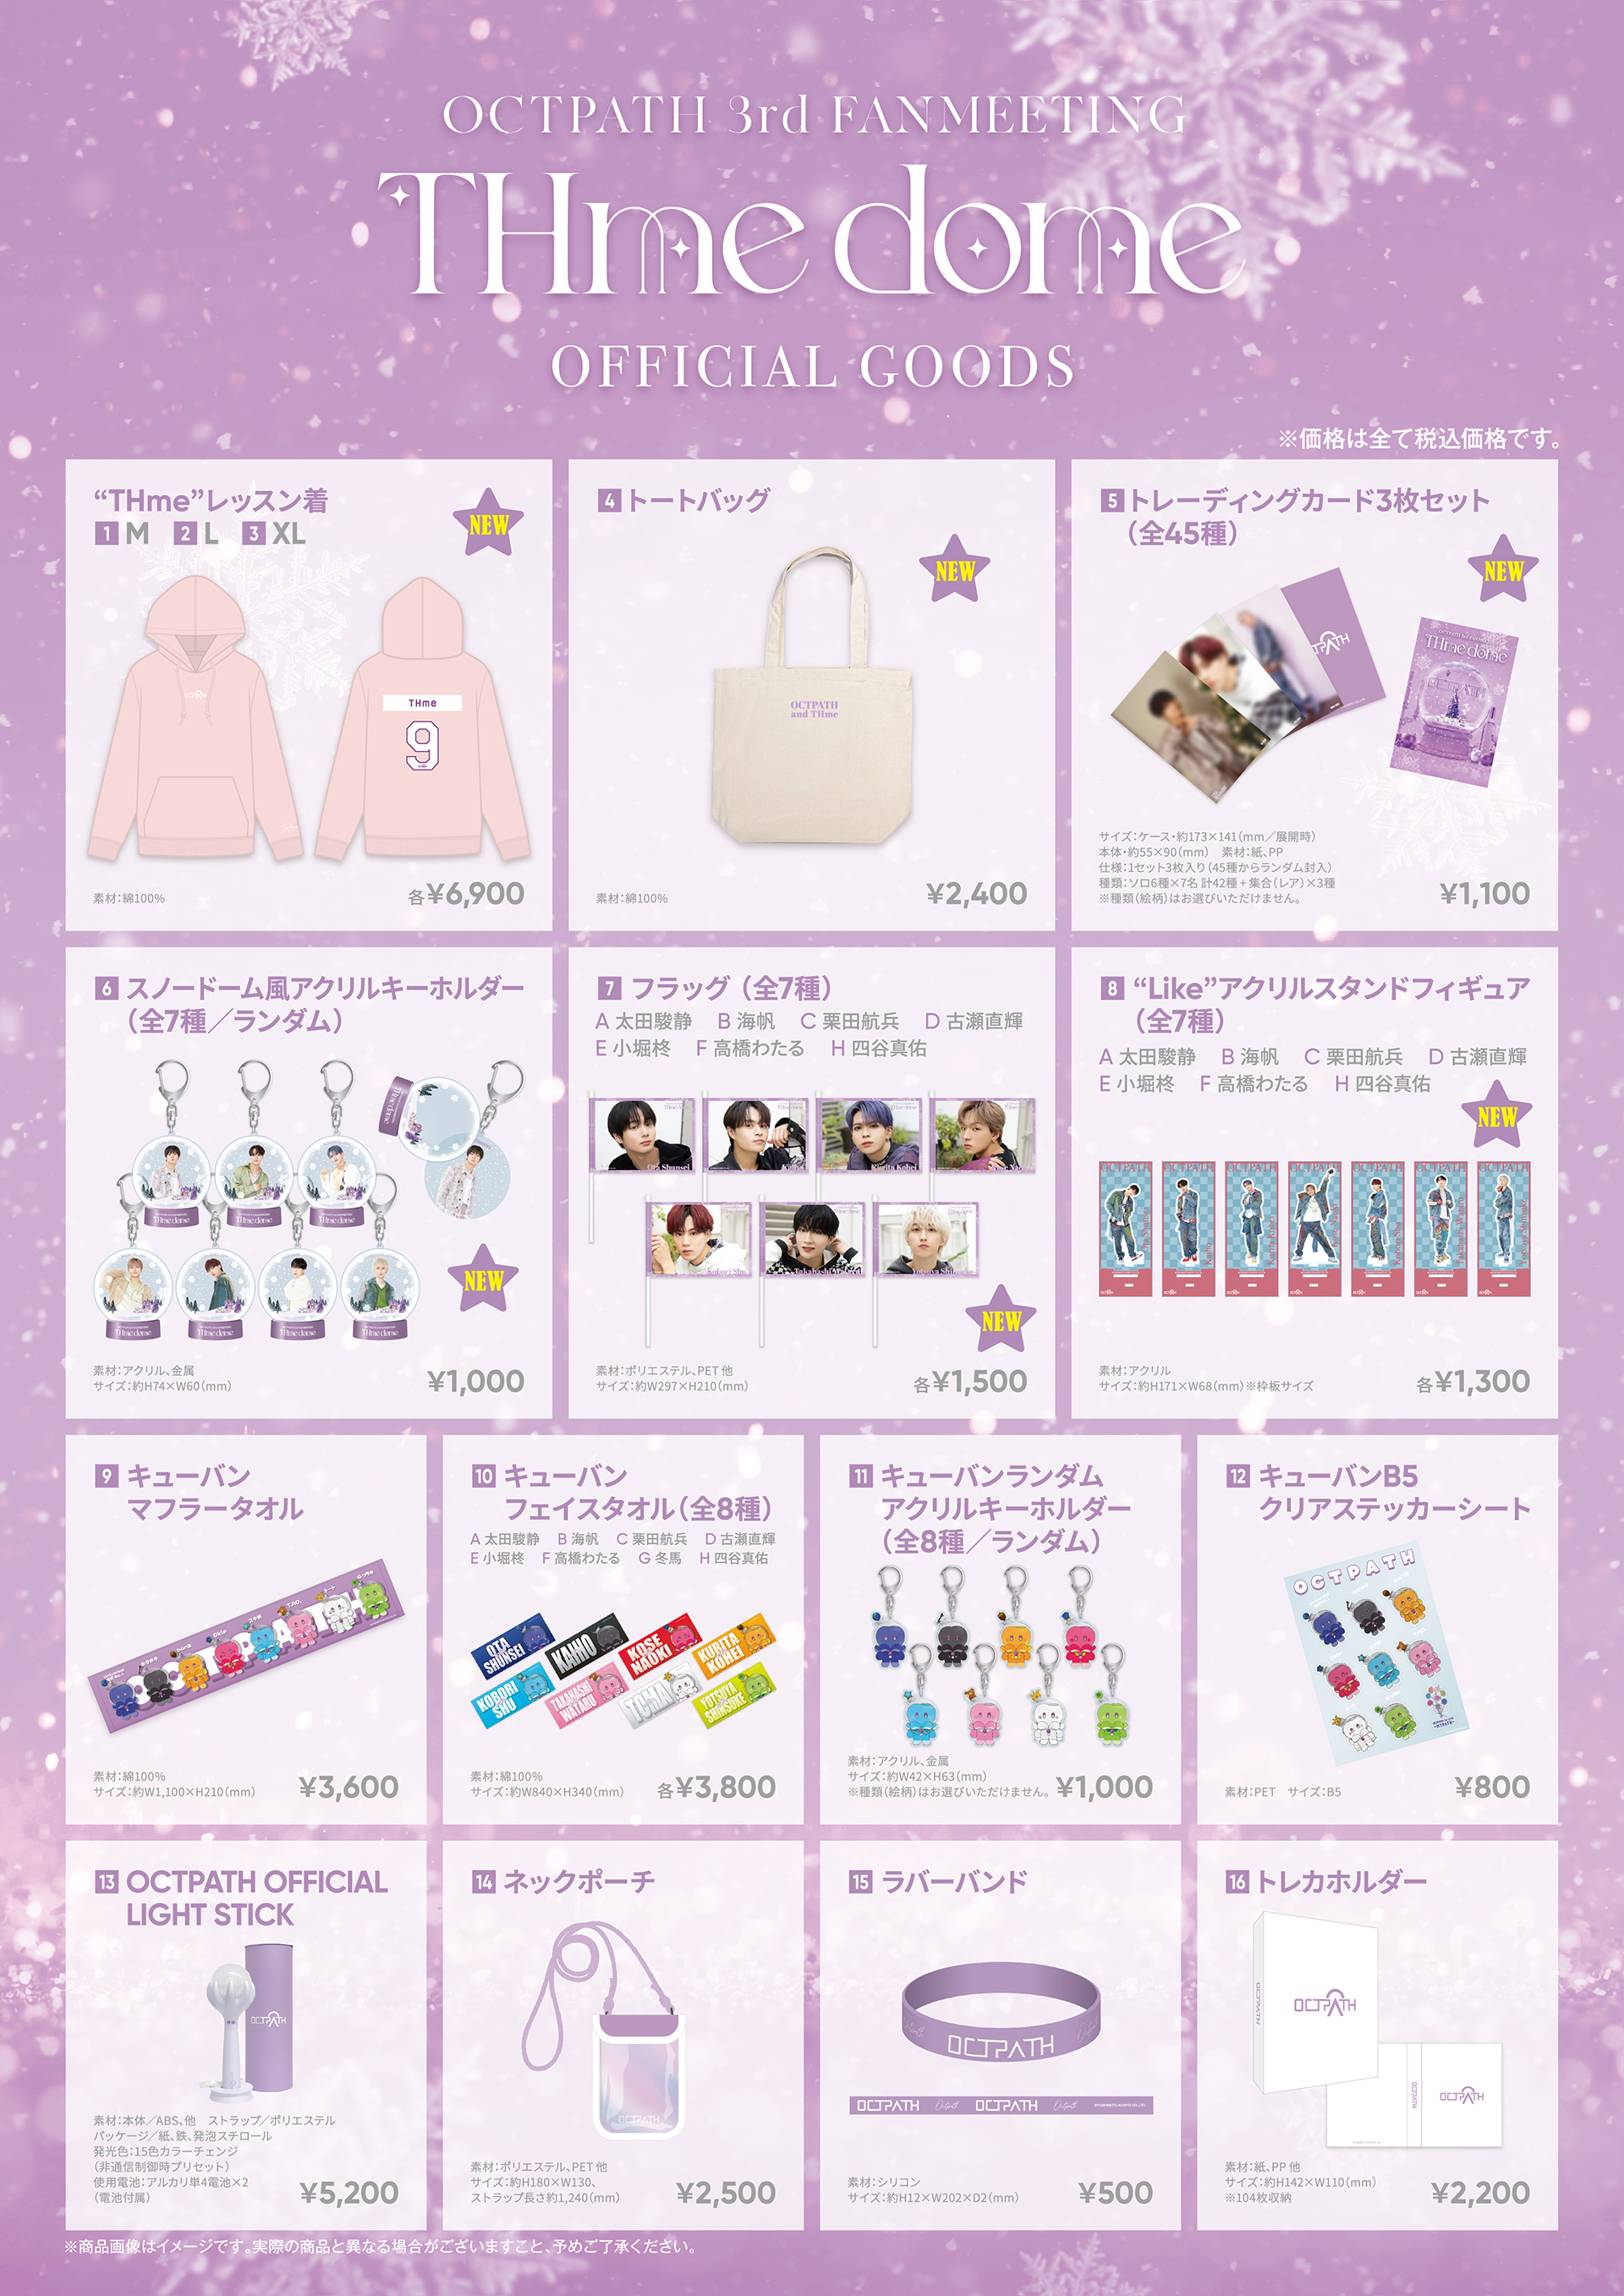 OFFICIAL GOODS】「OCTPATH 3rd FANMEETING THme dome」GOODS 会場販売 ...